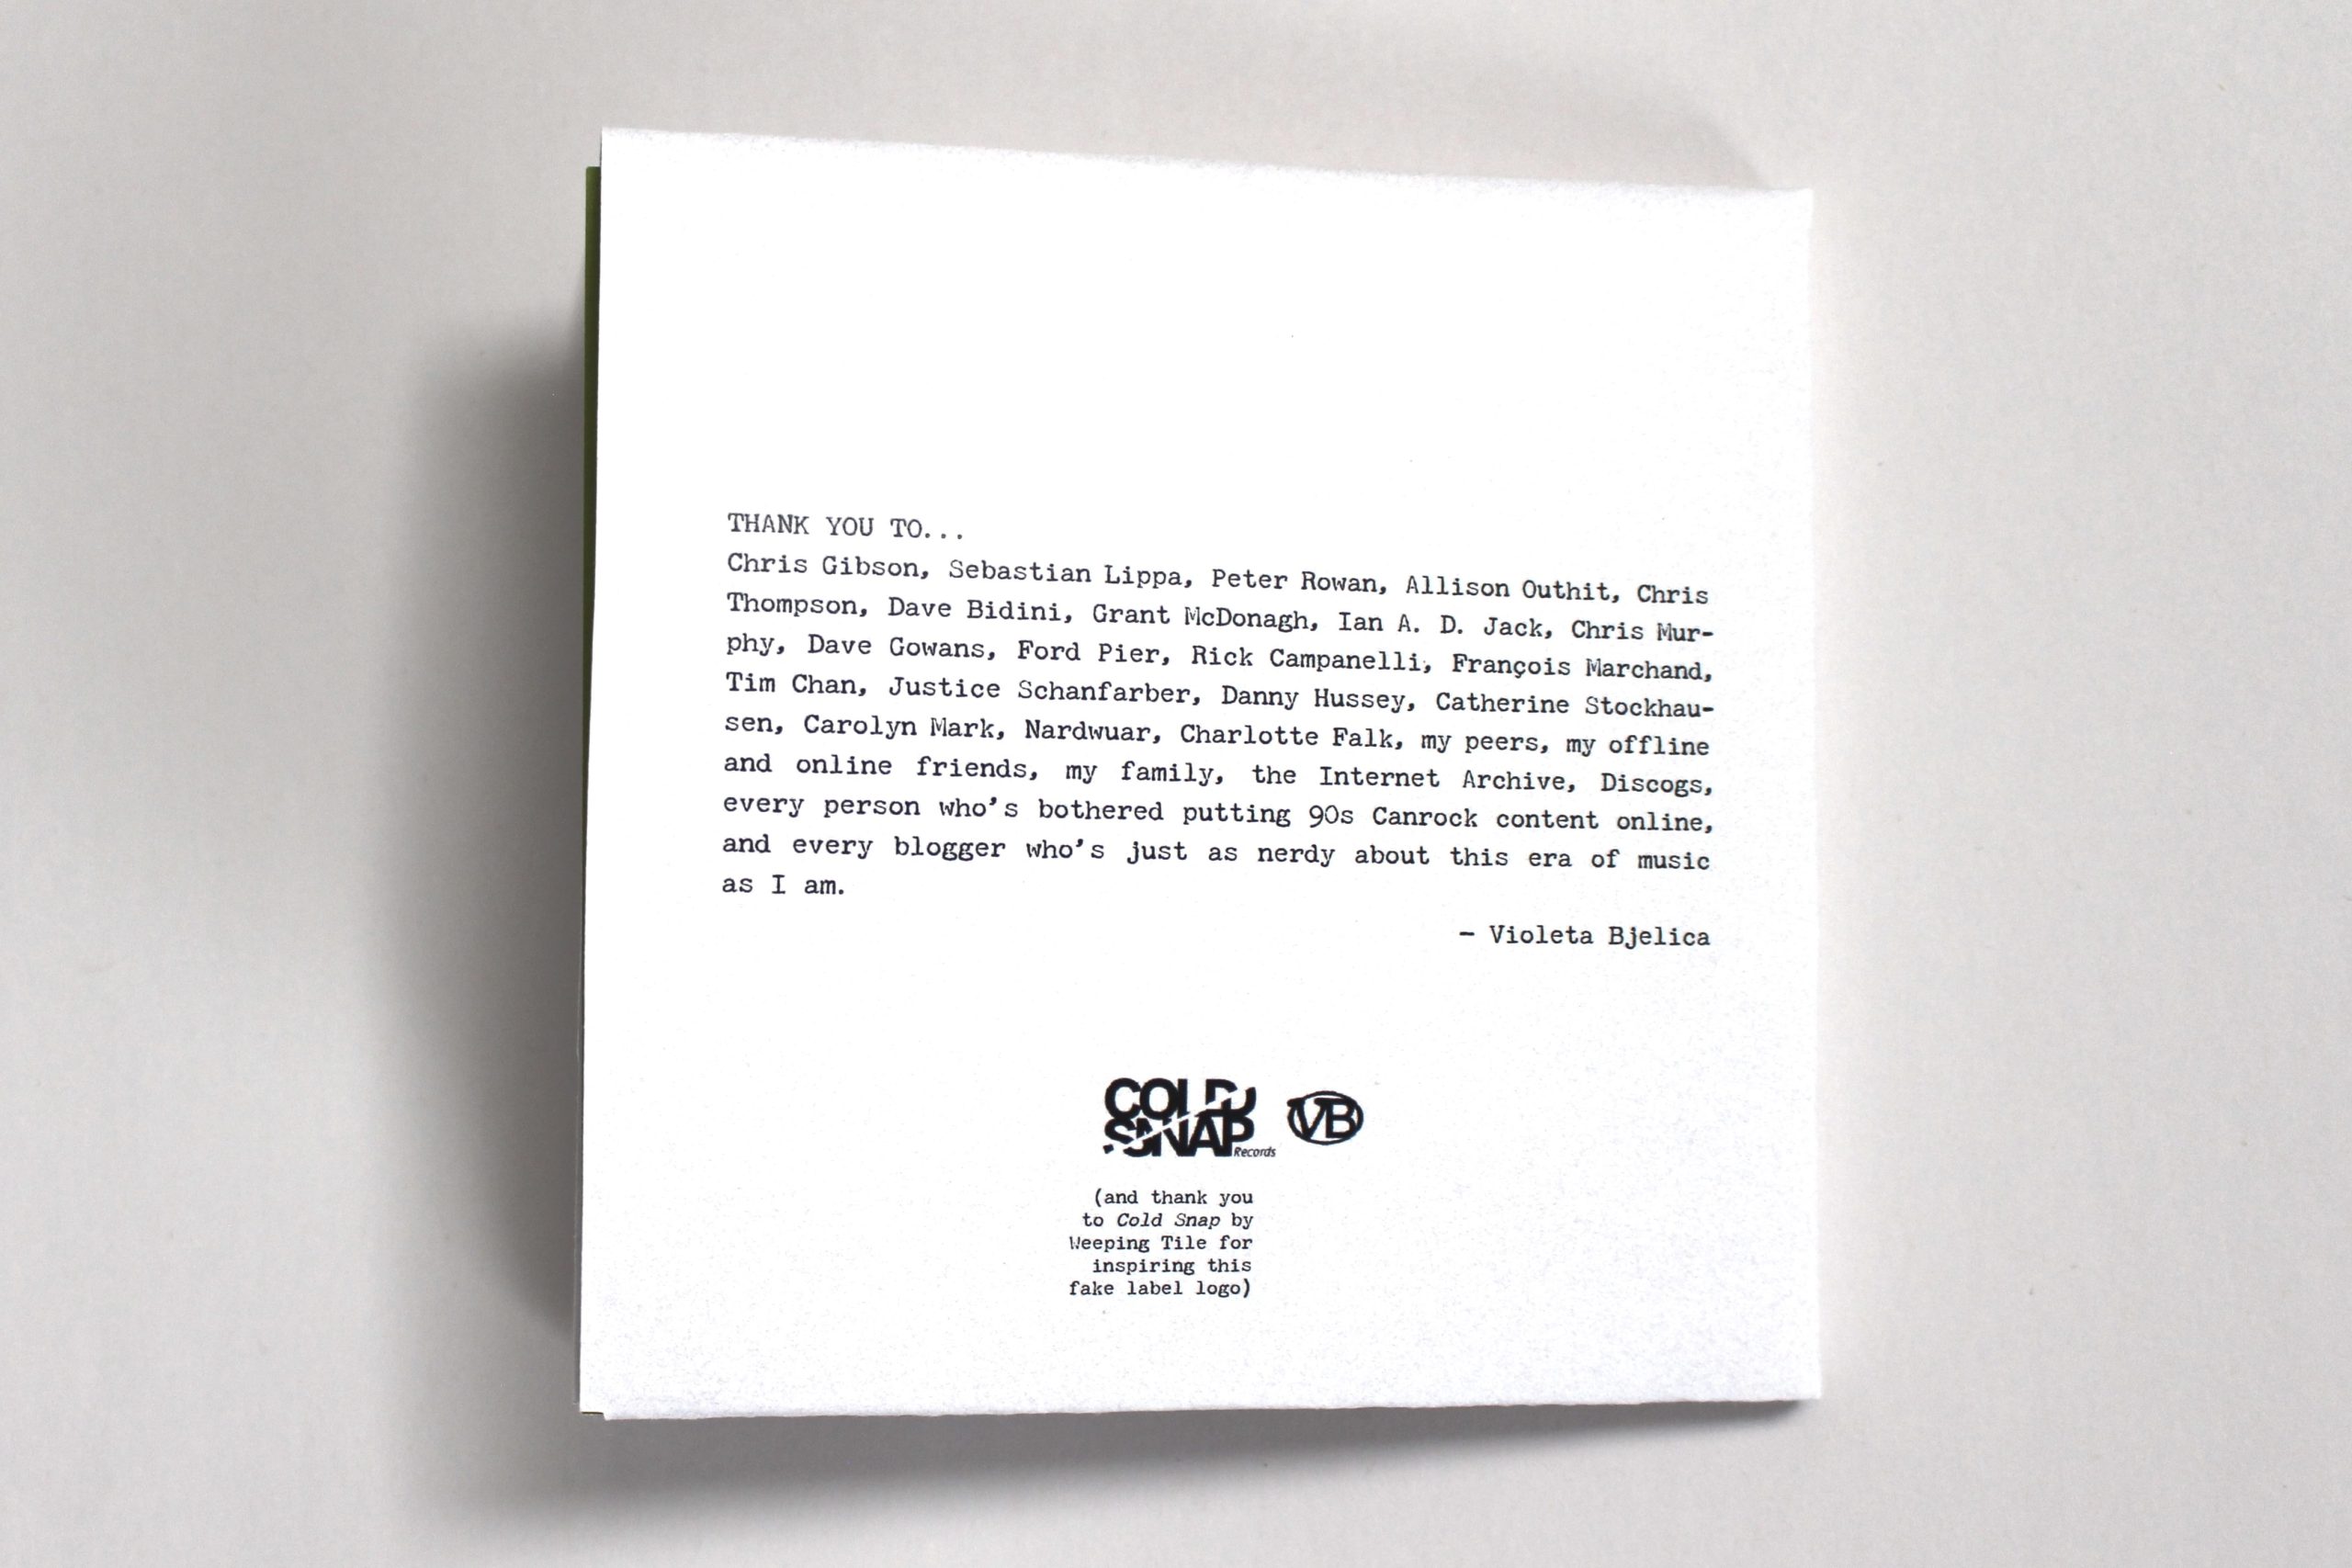 The back of a white gatefold CD sleeve with black text that reads: "THANK YOU TO...
Chris Gibson, Sebastian Lippa, Peter Rowan, Allison Outhit, Chris Thompson, Dave Bidini, Grant McDonagh, Ian A. D. Jack, Chris Murphy, Dave Gowans, Ford Pier, Rick Campanelli, François Marchand, Tim Chan, Justice Schanfarber, Danny Hussey, Catherine Stockhausen, Carolyn Mark, Nardwuar, Charlotte Falk, my peers, my offline and online friends, my family, the Internet Archive, Discogs, every person who’s bothered putting 90s Canrock content online, and every blogger who’s just as nerdy about this era of music as I am.
— Violeta Bjelica" 
At the bottom is a logo with the name Cold Snap in bold and Records in smaller text on the side, and another logo beside it with the letters VB enclosed in a circle. Underneath the Cold Snap logo reads: "(and thank you to Cold Snap by Weeping Tile for inspiring this fake label logo)".